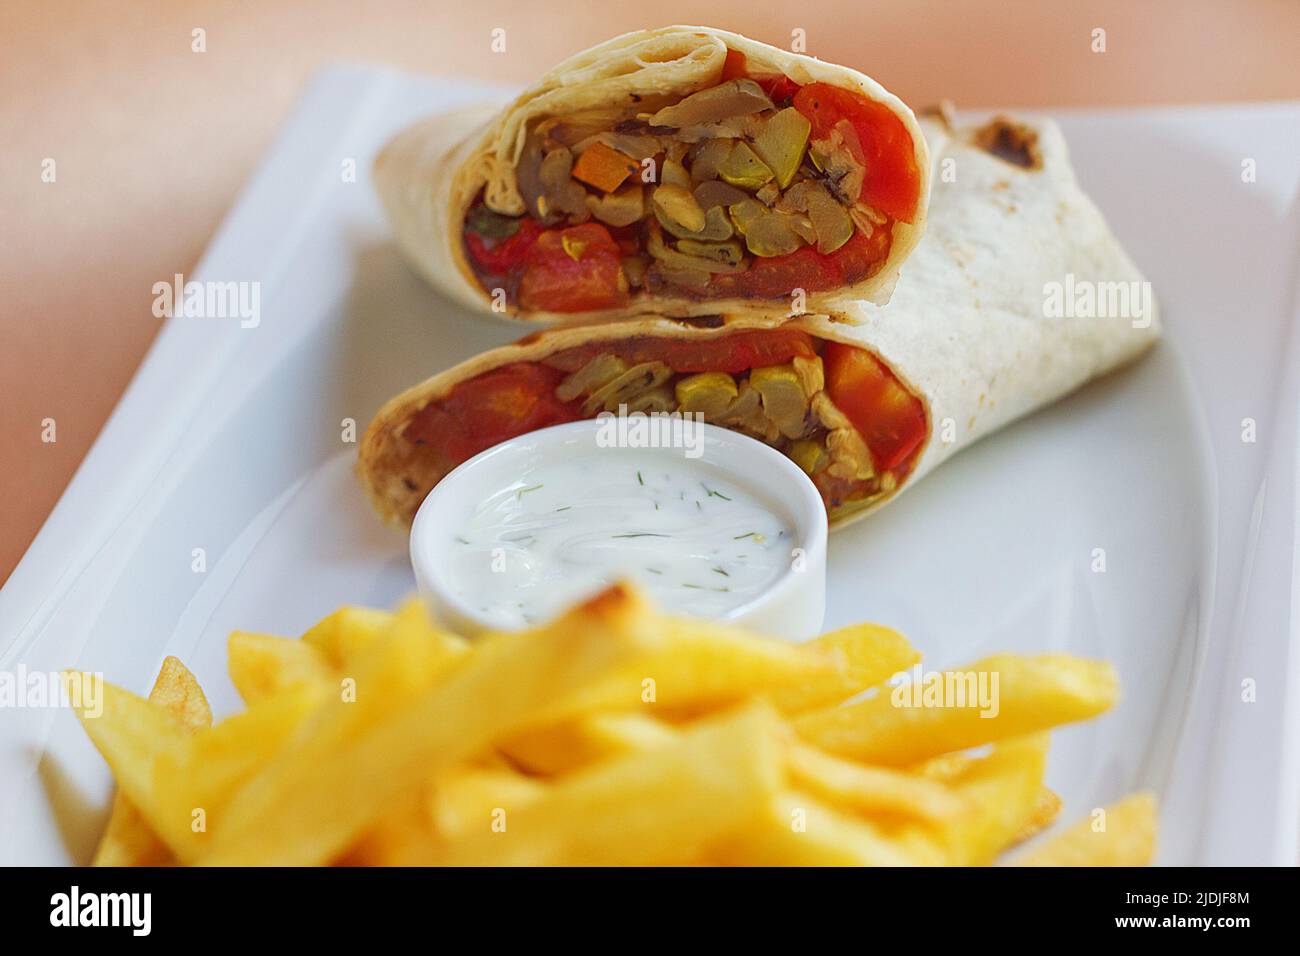 Meat Wrap with sause and fried potatoes Stock Photo